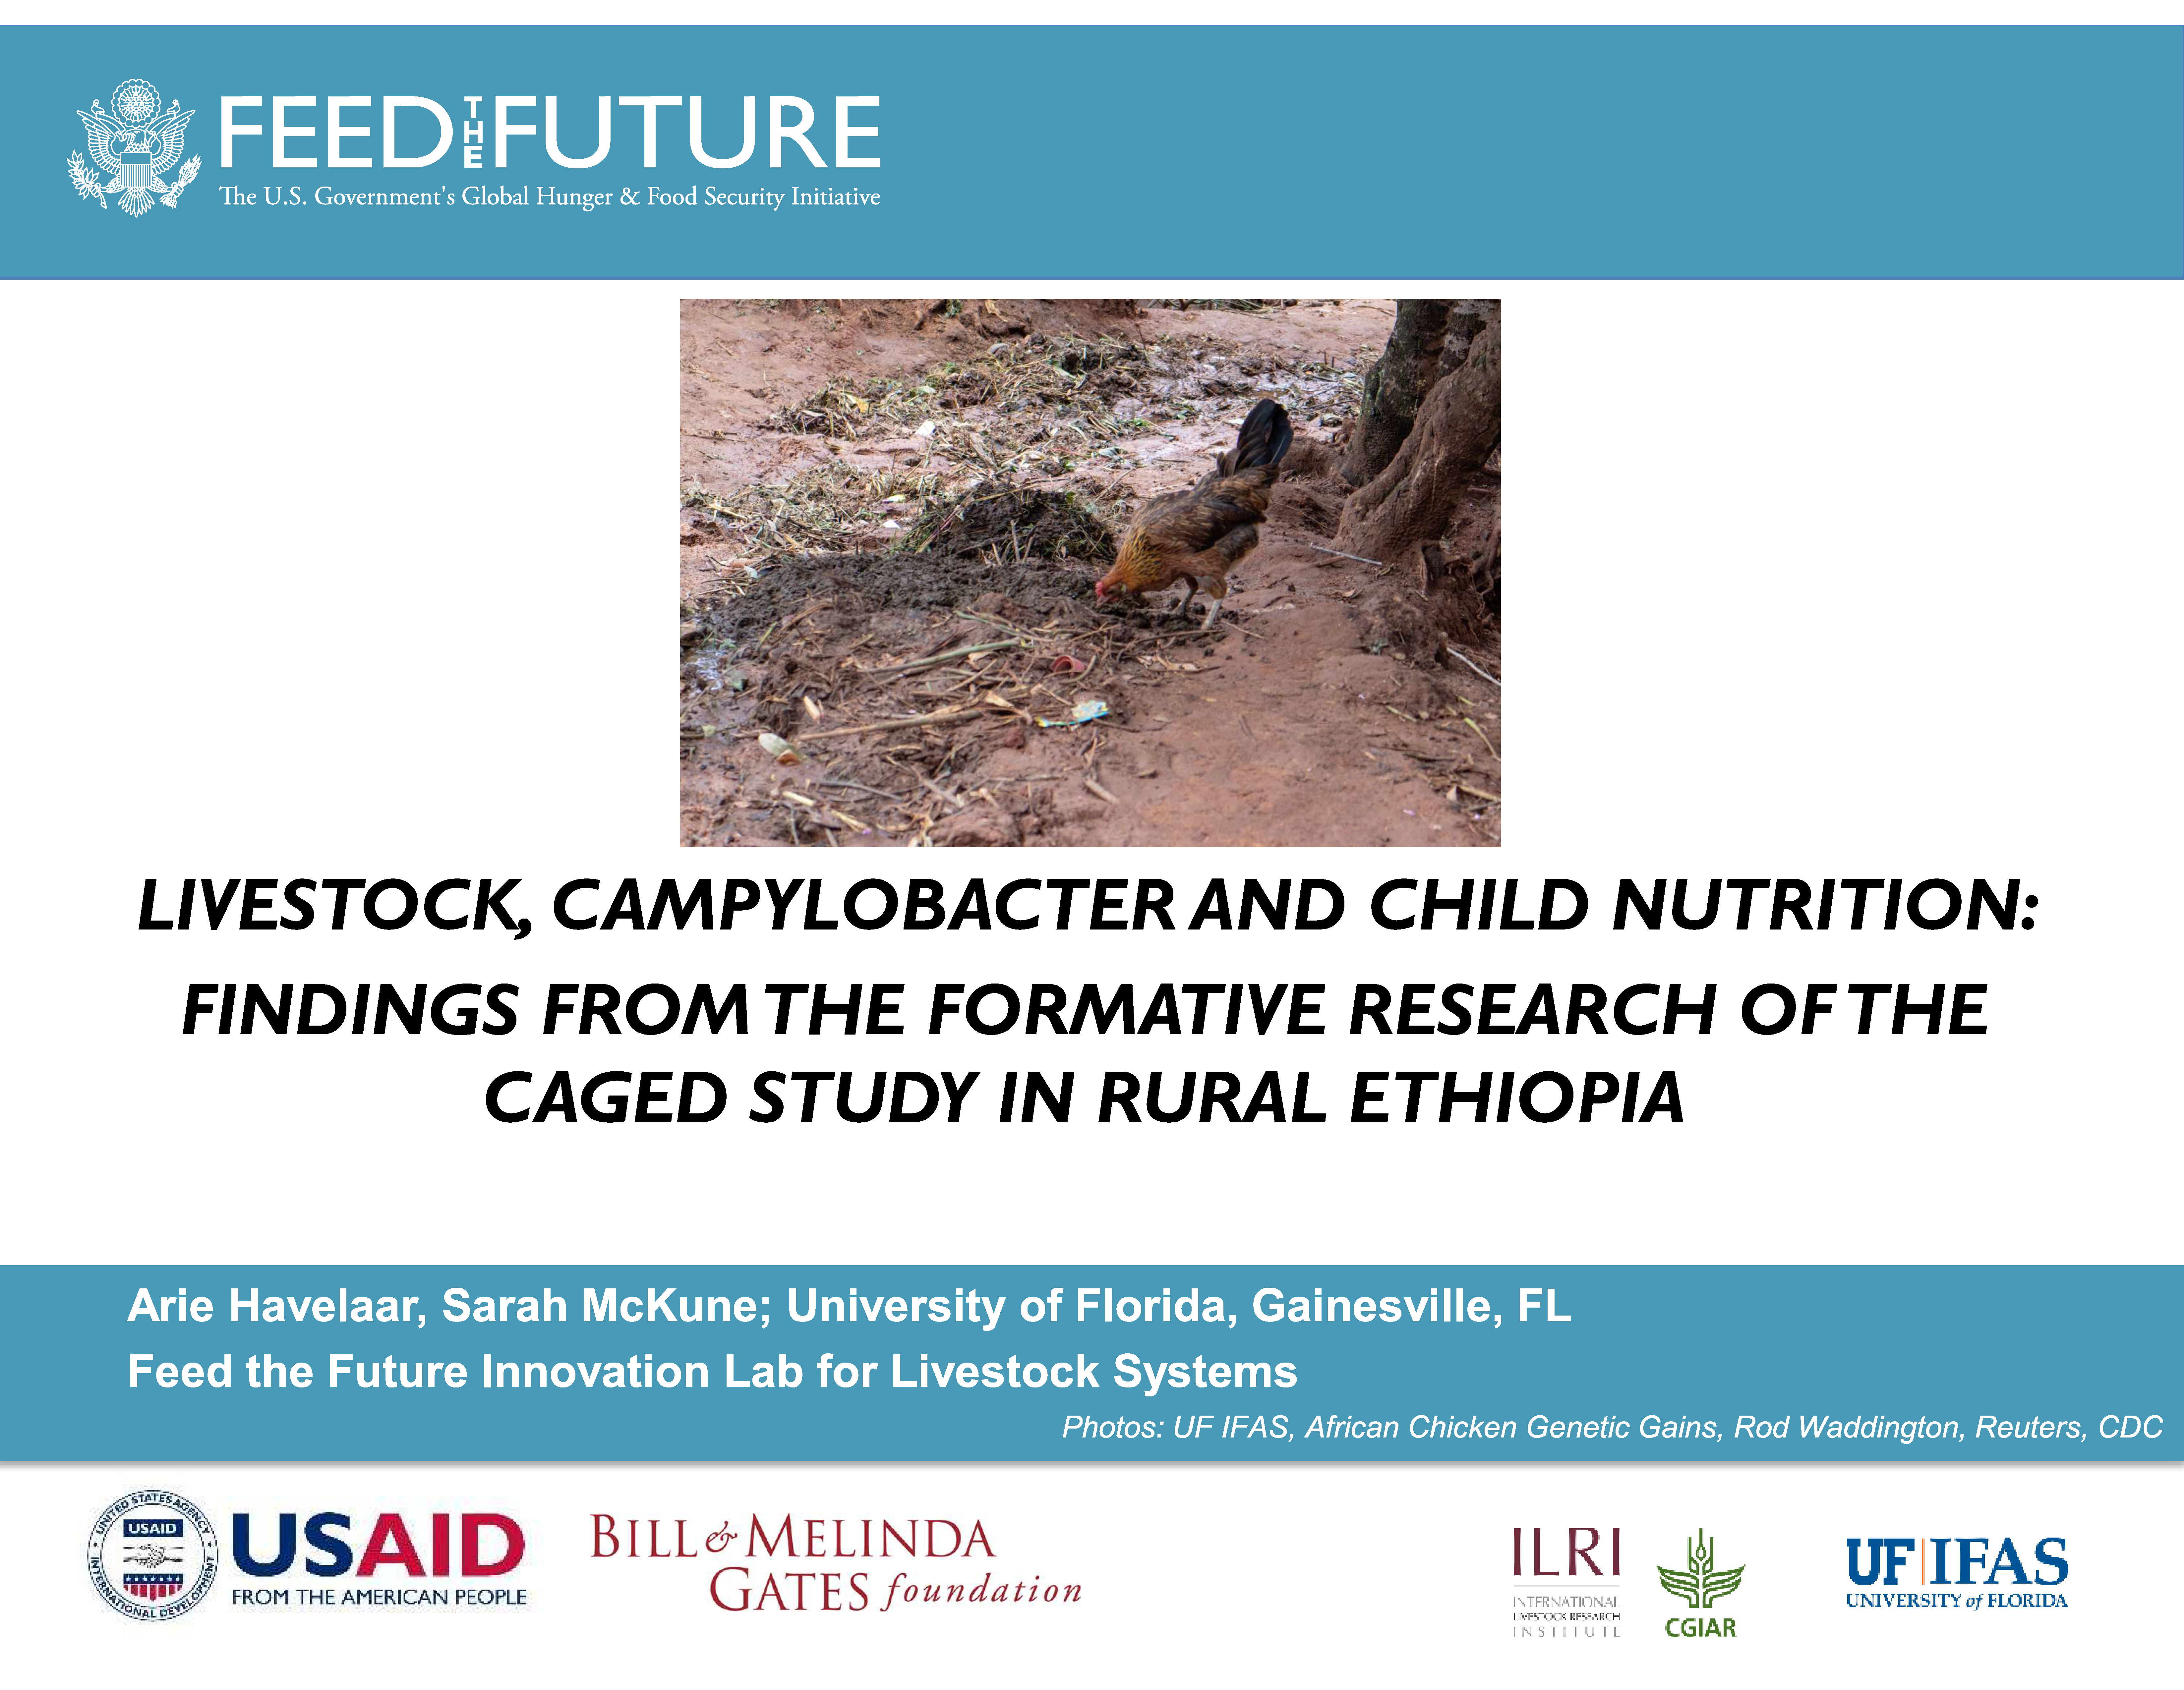 The cover slide of the presentation. It has a photo of a chicken in the center. Up top is the Feed the Future logo. Underneath is the title of the presentation and the autors.